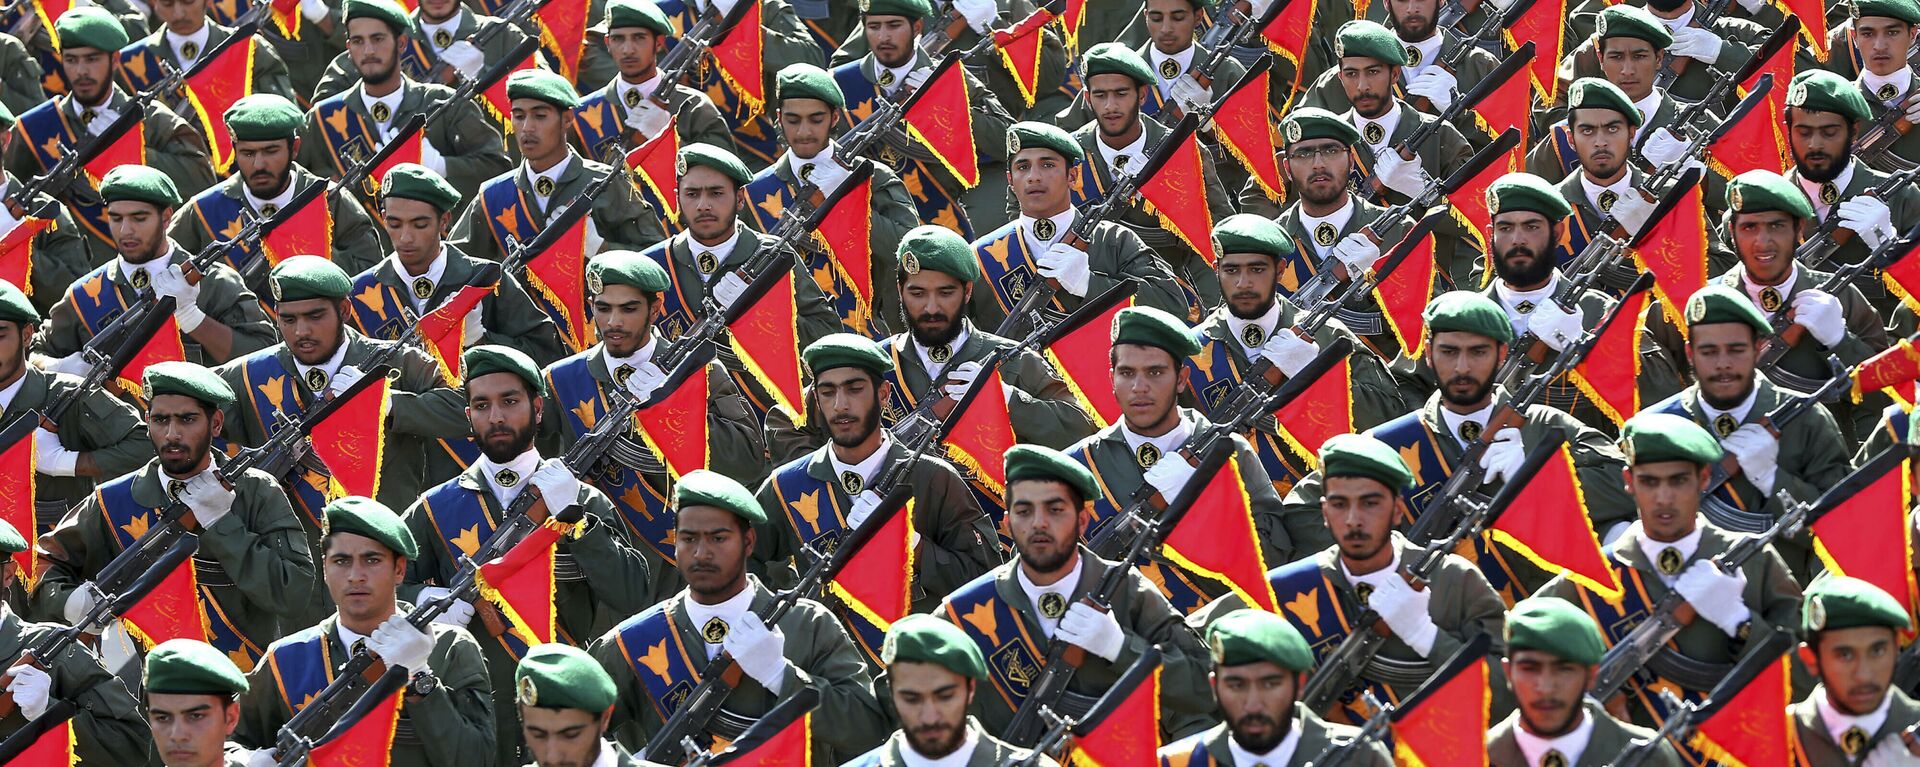 In this 21 September 2016 file photo, Iran's Revolutionary Guard troops march in a military parade marking the 36th anniversary of Iraq's 1980 invasion of Iran, in front of the shrine of late revolutionary founder Ayatollah Khomeini, just outside Tehran, Iran.  - Sputnik International, 1920, 29.11.2020